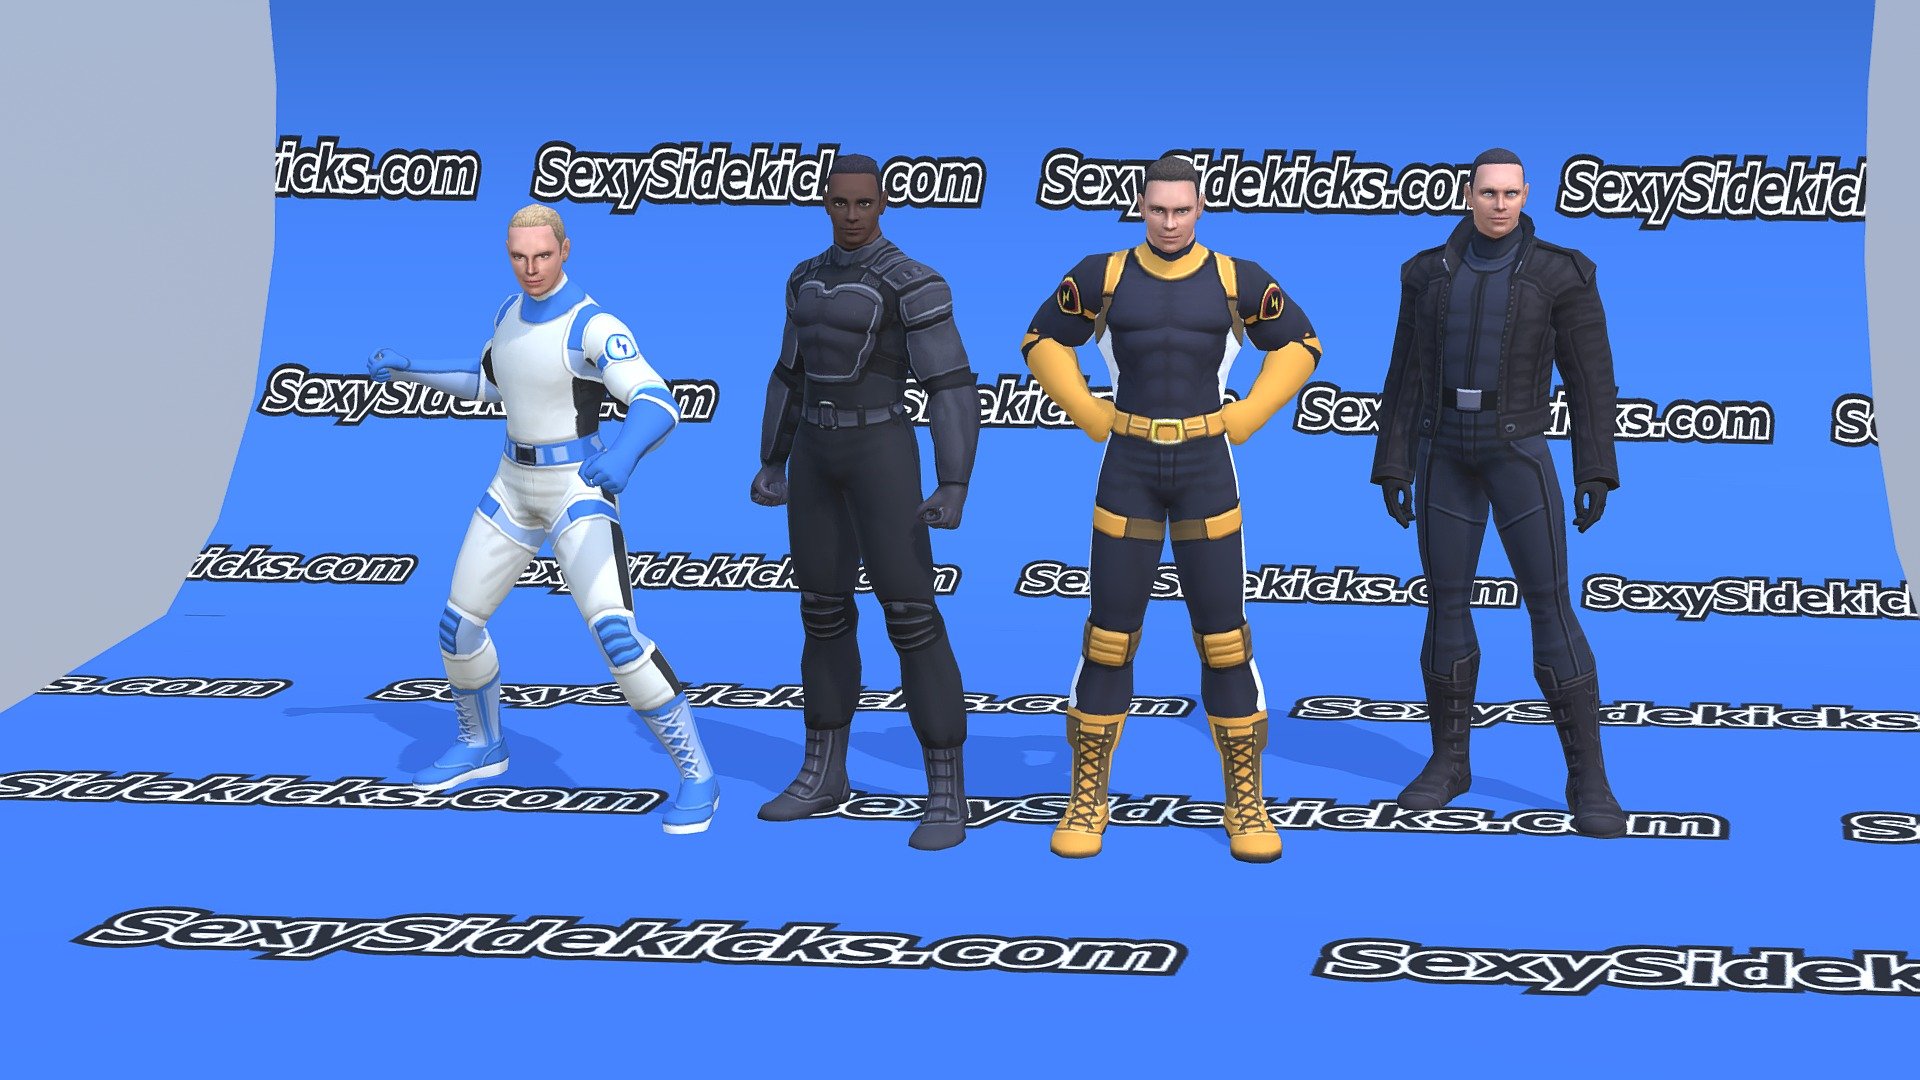 The Superhero Construction Kit will be for in sale May 2018. 

The Superhero Construction Kit includes:
        42 male superhero animations (root motion and non root included)
        42 female superhero animations (root motion and non root included)
        15 male outfits
        20 female outfits
        30 female hairstyles
        20 male hairstyles
        PSD layers for changing haircolor, eye color, faces, skin color
        PSD layers for outfits, so you can mix and match - The Superhero Construction Kit Modern Males1-4 - 3D model by rungy 3d model